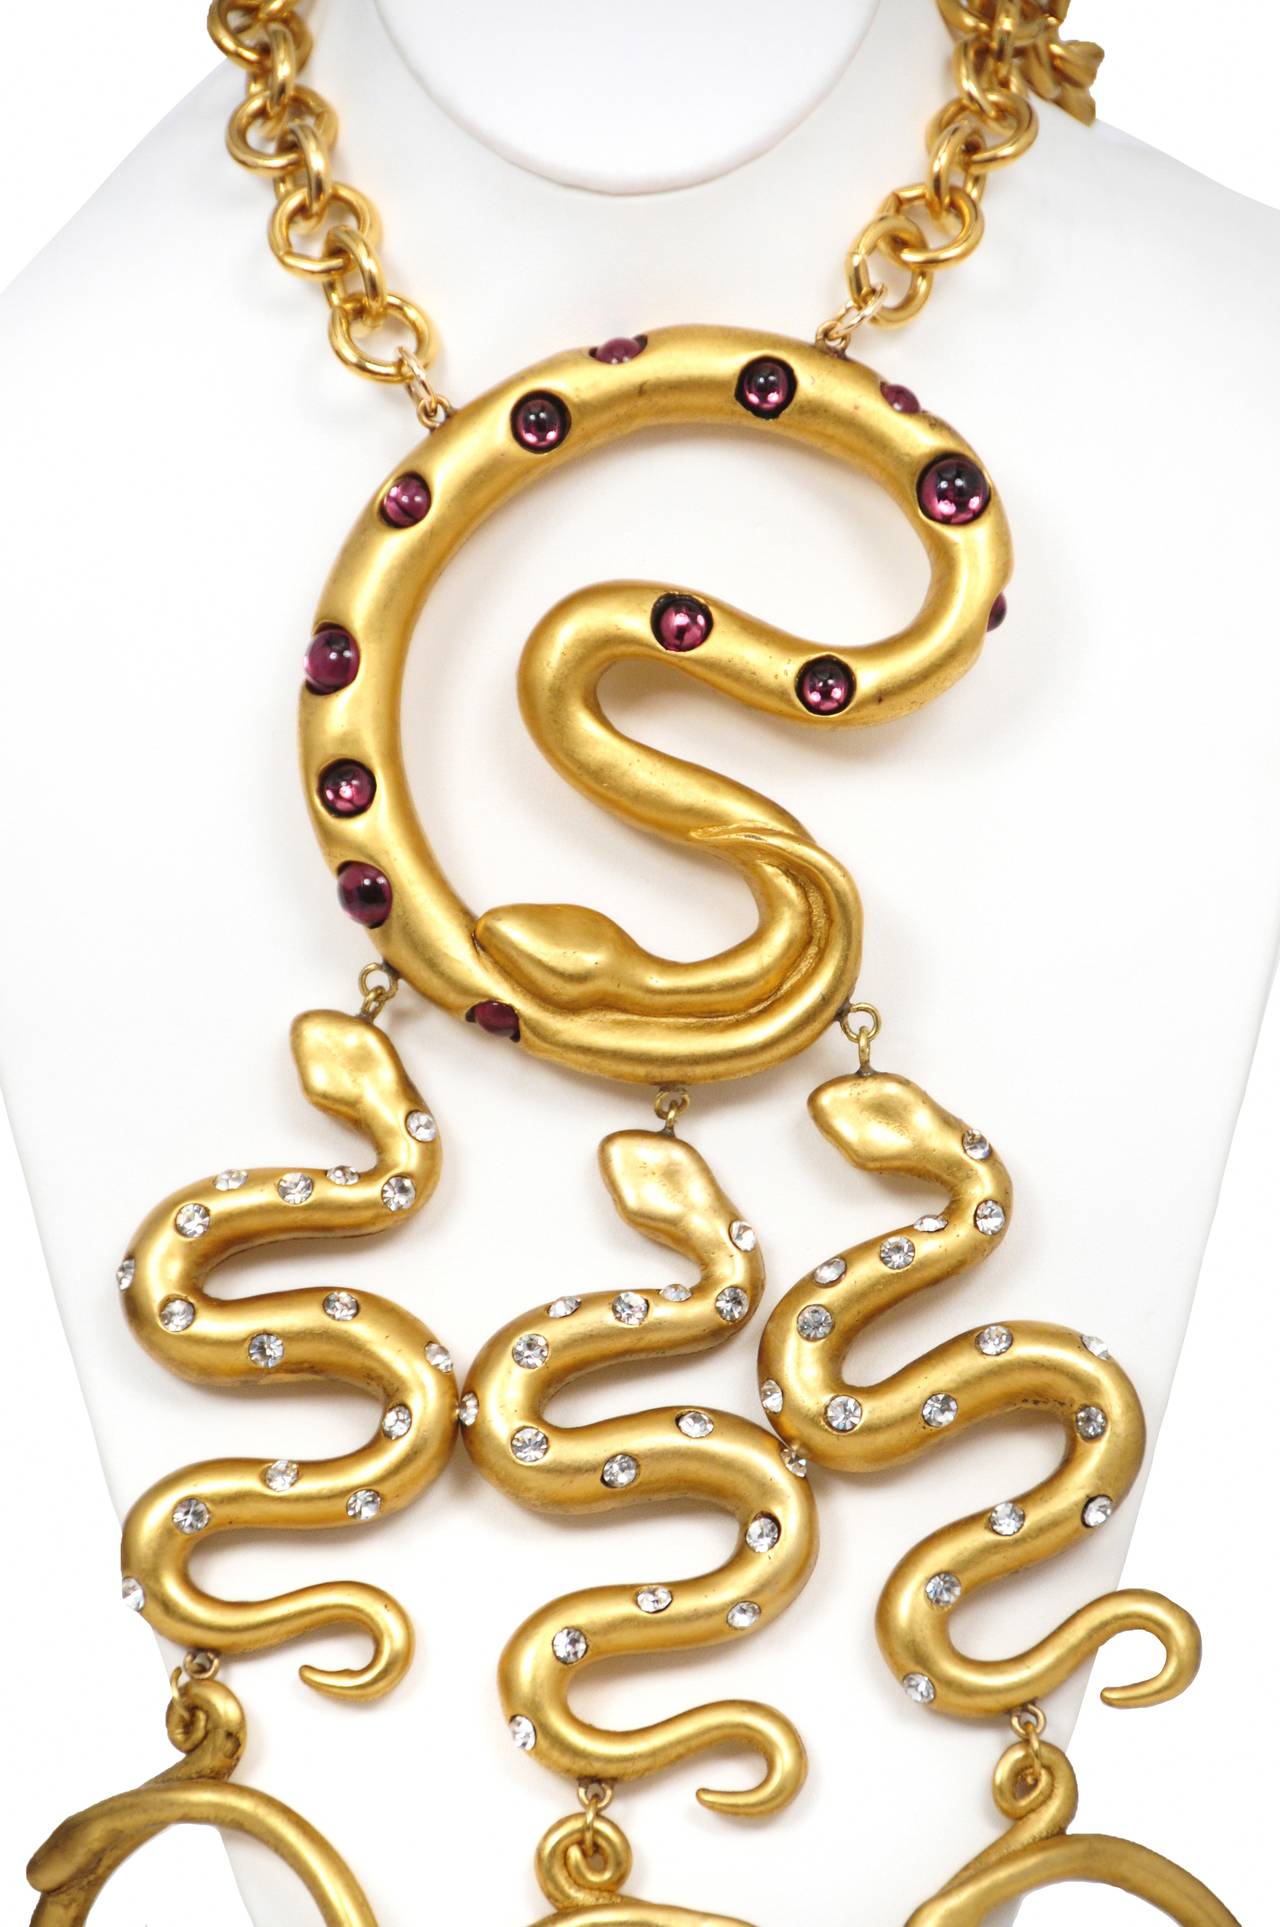 Vintage Escada serpent motif necklace featuring three jewel encrusted gold tone snakes that hang from a large purple jewel encrusted coiled snake that sits perched at the collar suspended by a gold tone link chain.